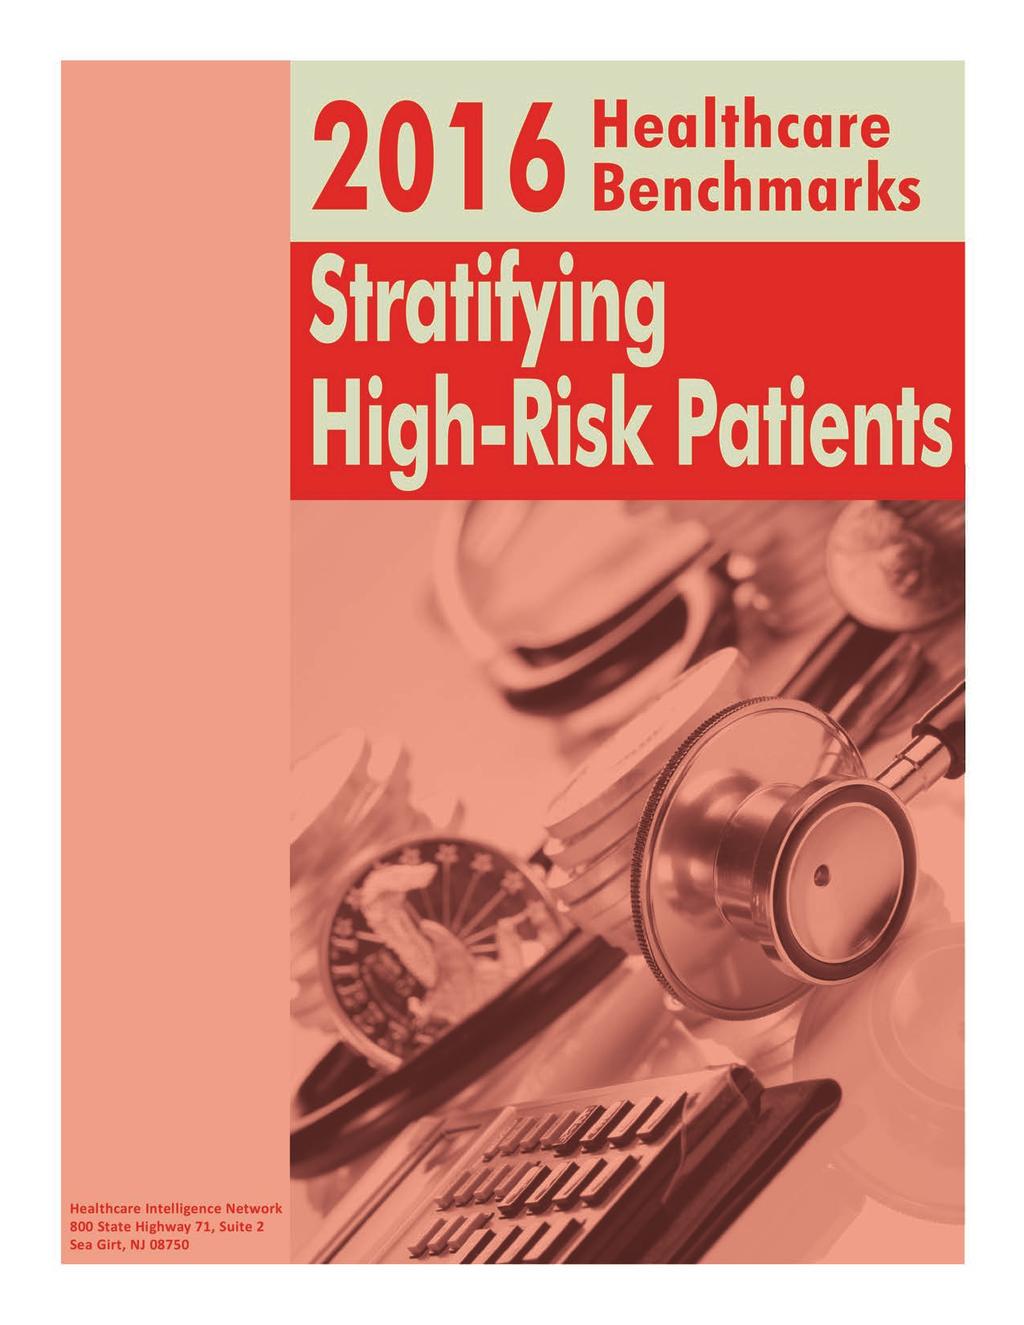 Note: This is an authorized excerpt from 2016 Healthcare Benchmarks: Stratifying High-Risk Patients.